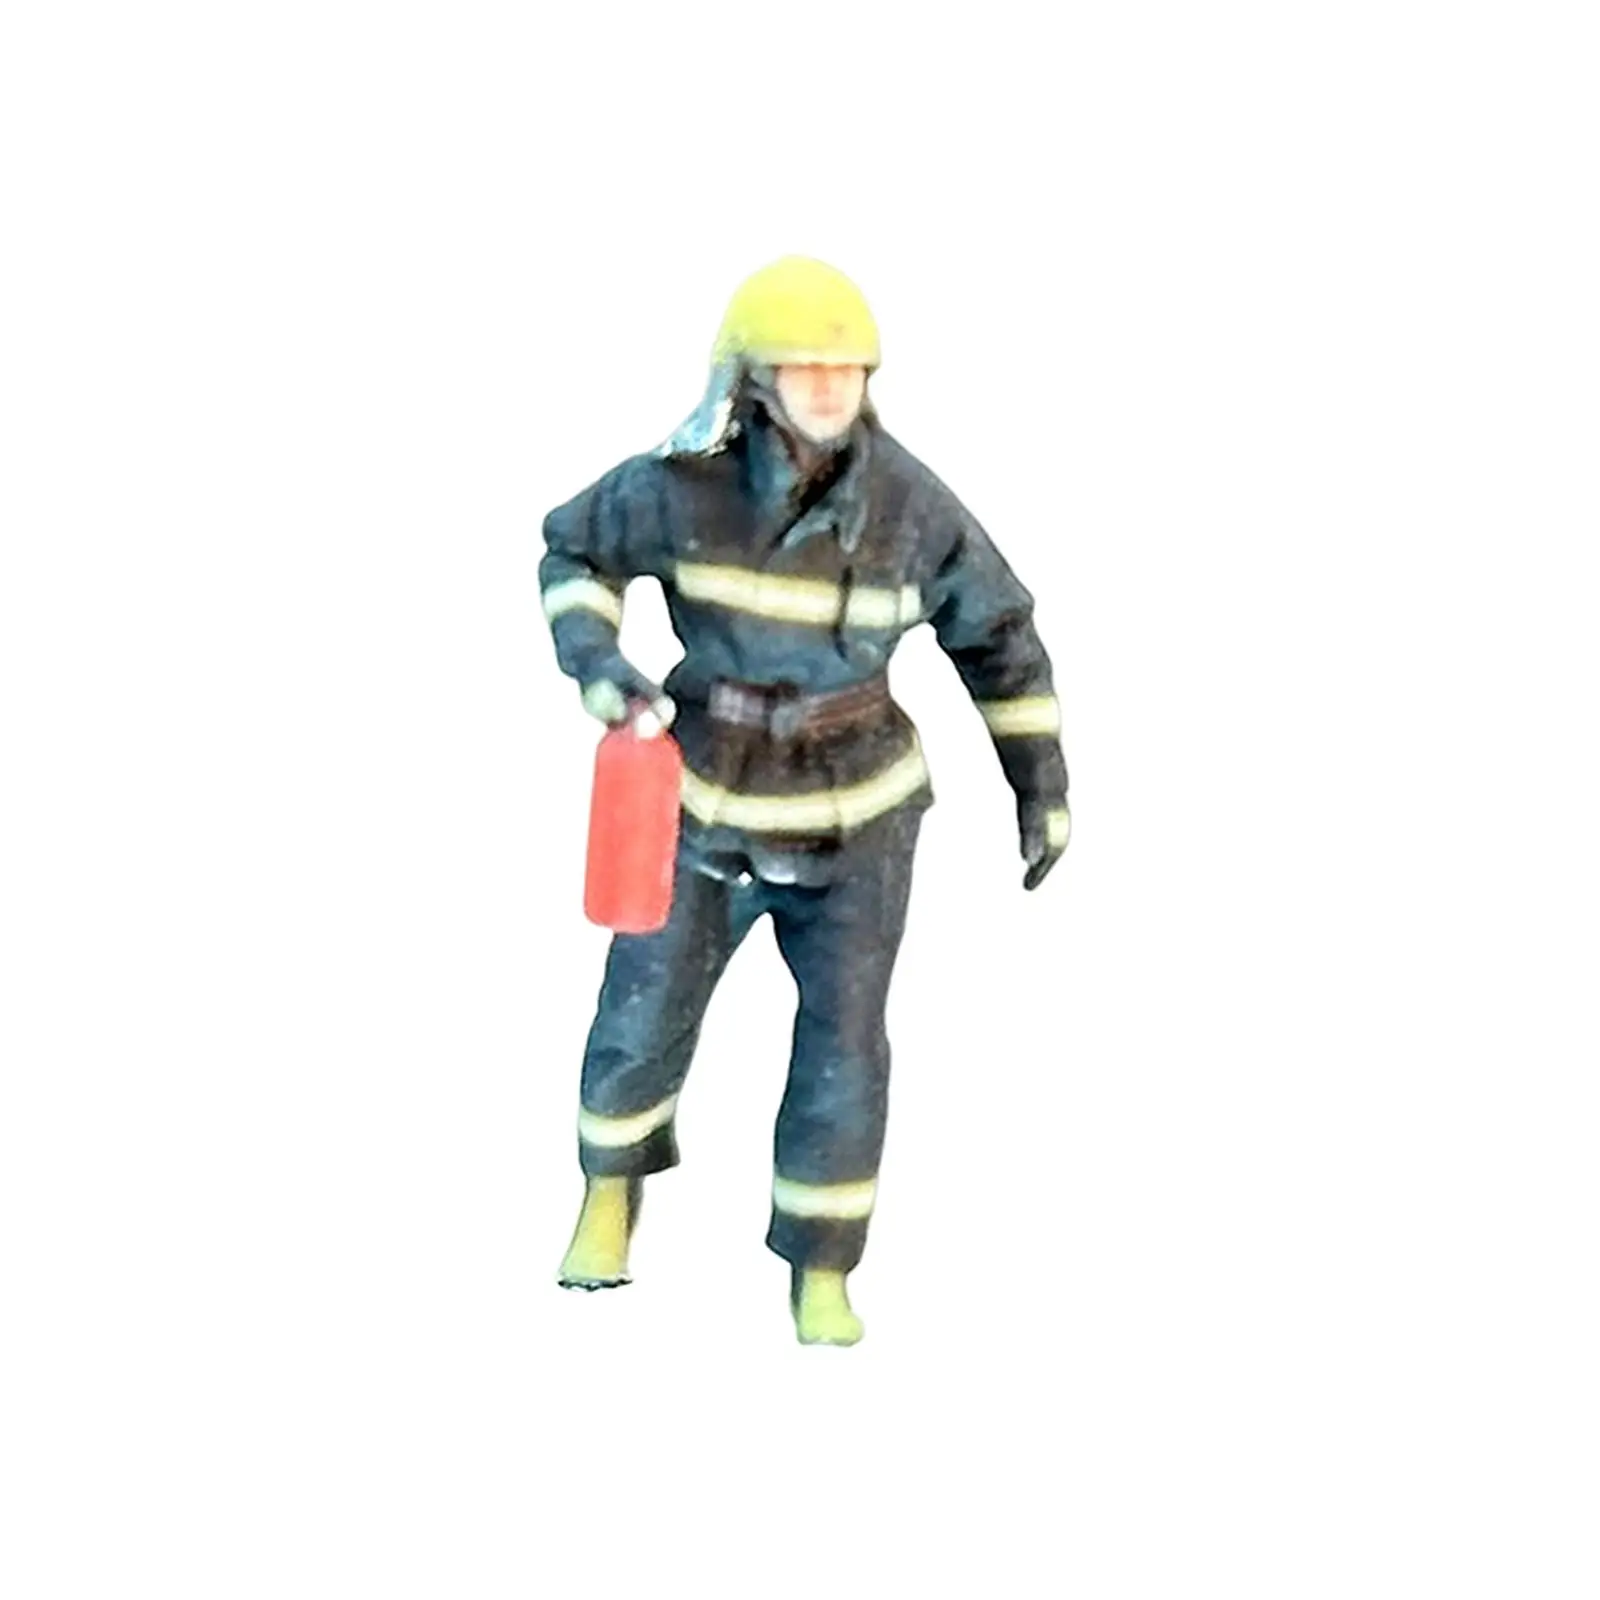 Miniature 1:64 Firefighter Figures Miniature Model Tiny People Model for Micro Landscapes Diorama Photography Props Layout Decor